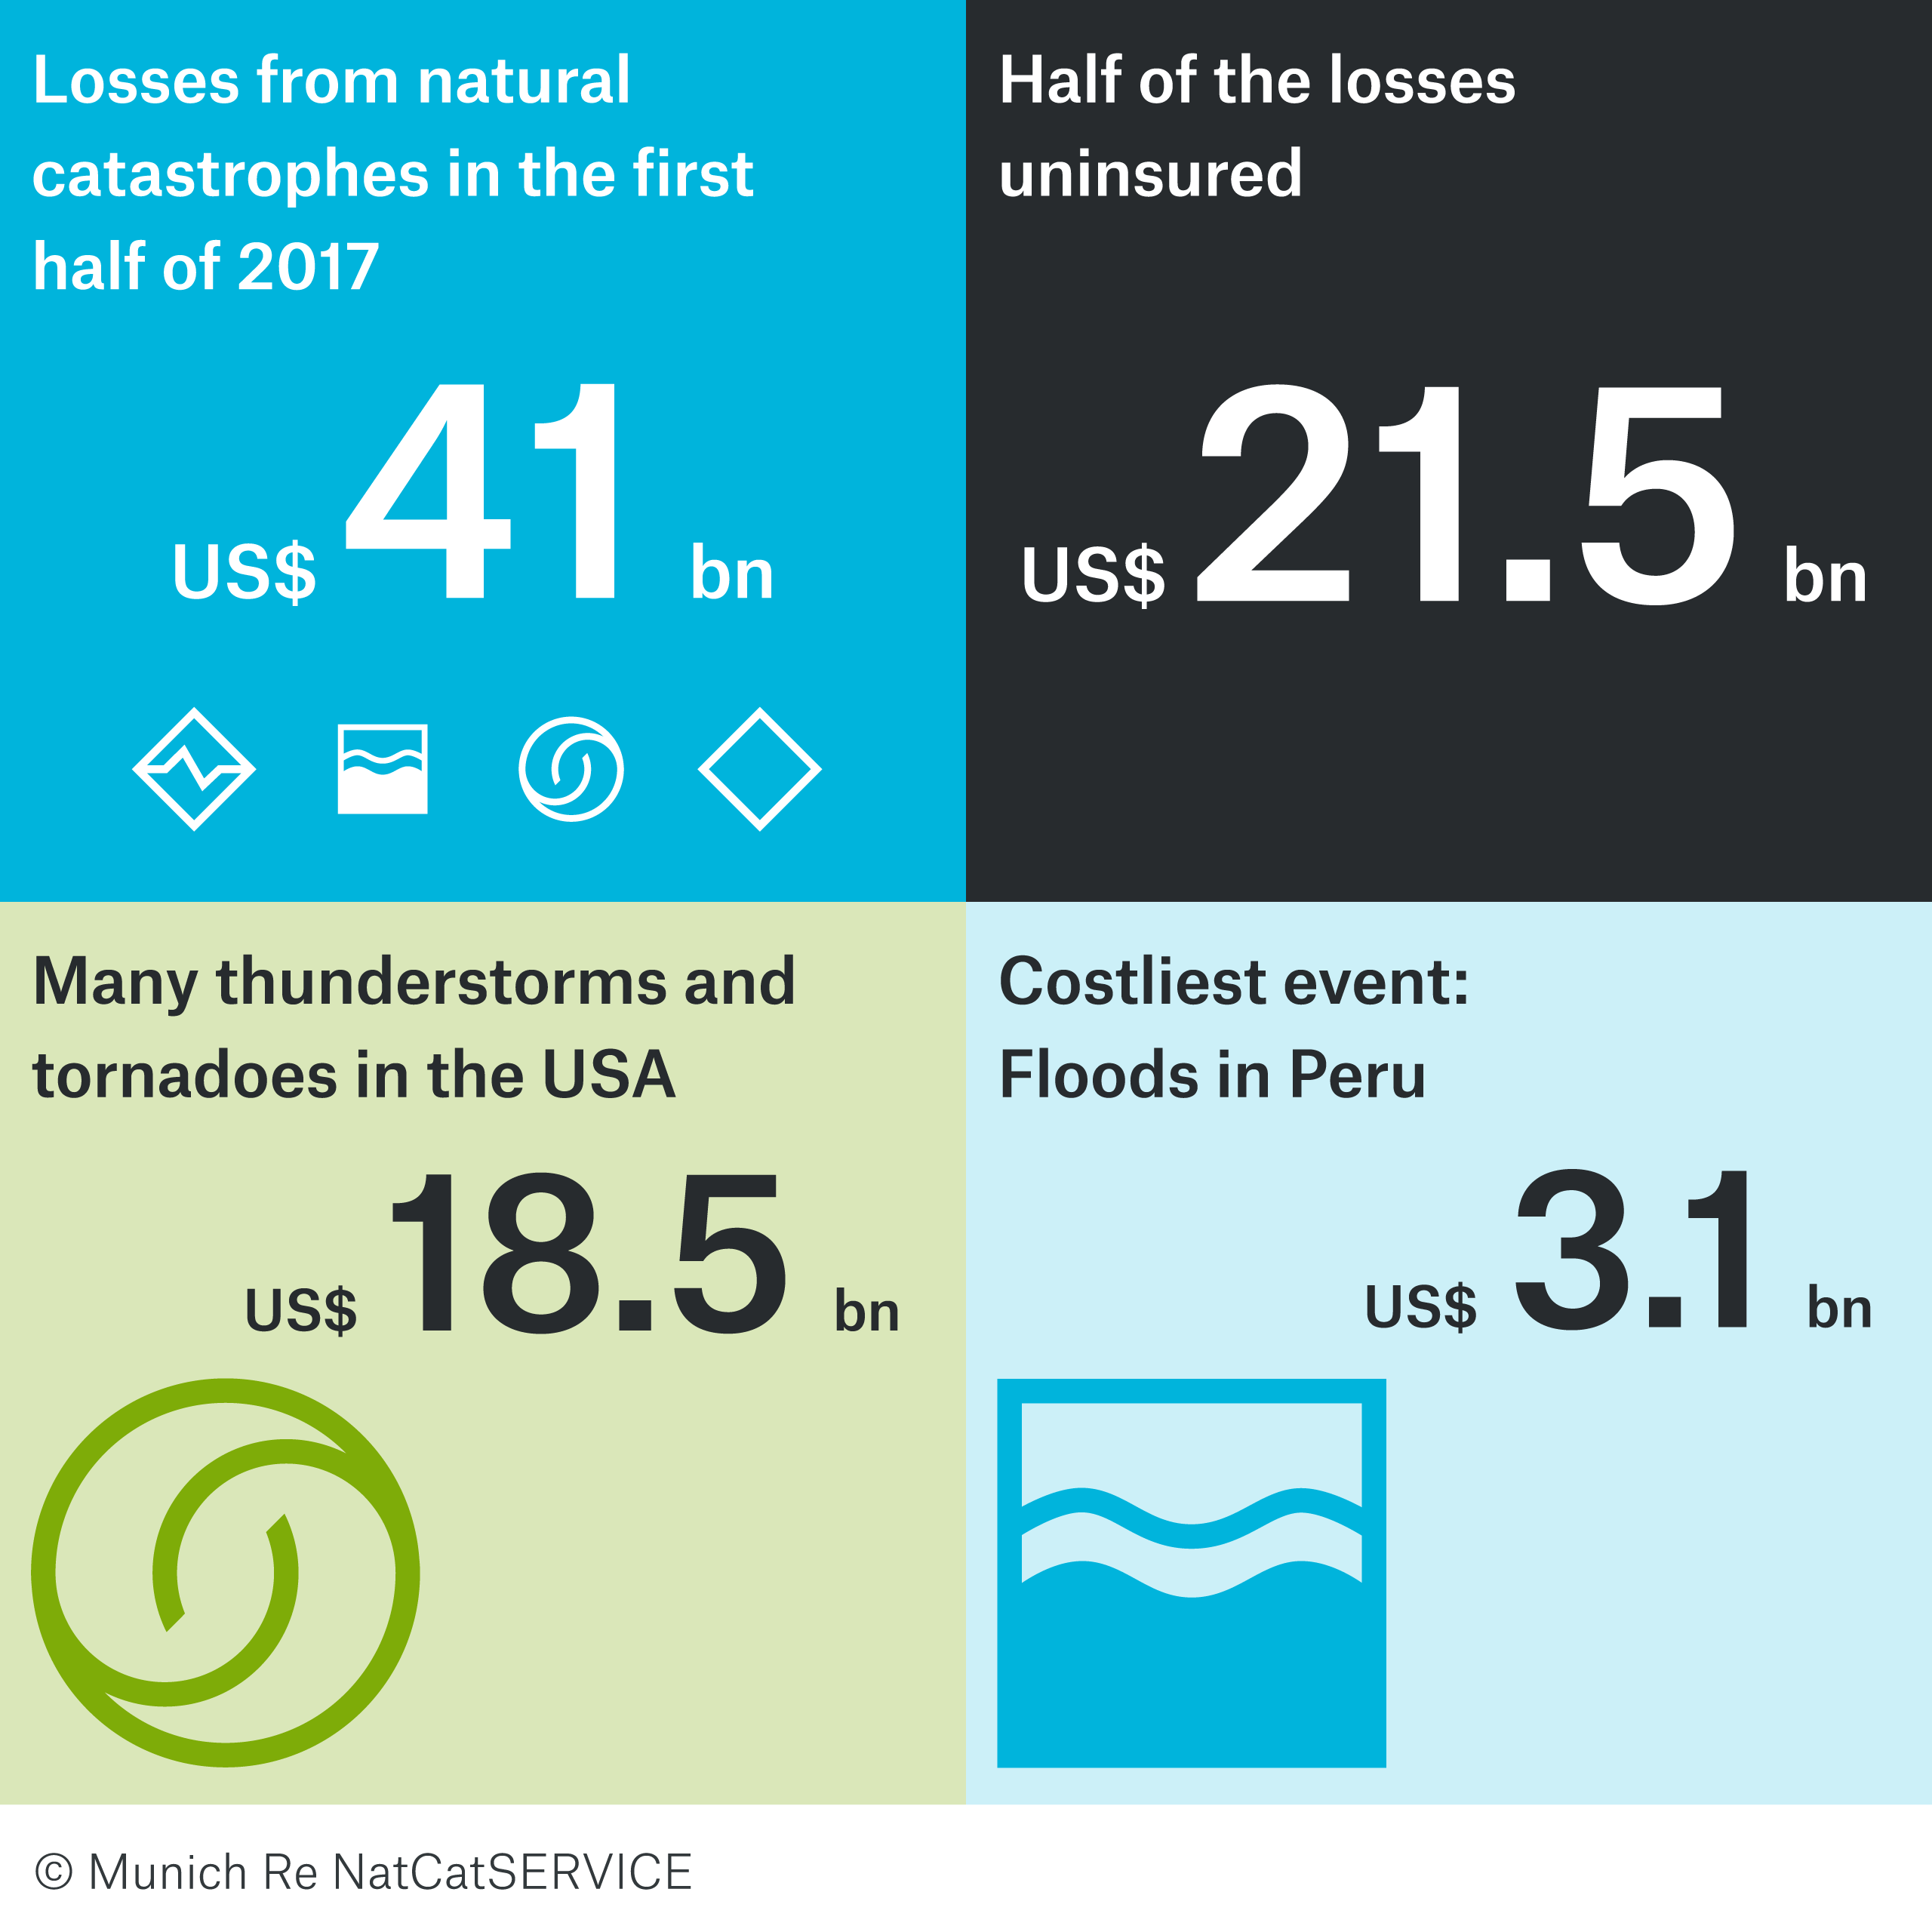 Natural catastrophe review for the first half of 2017: A series of powerful thunderstorms in the USA causes large losses